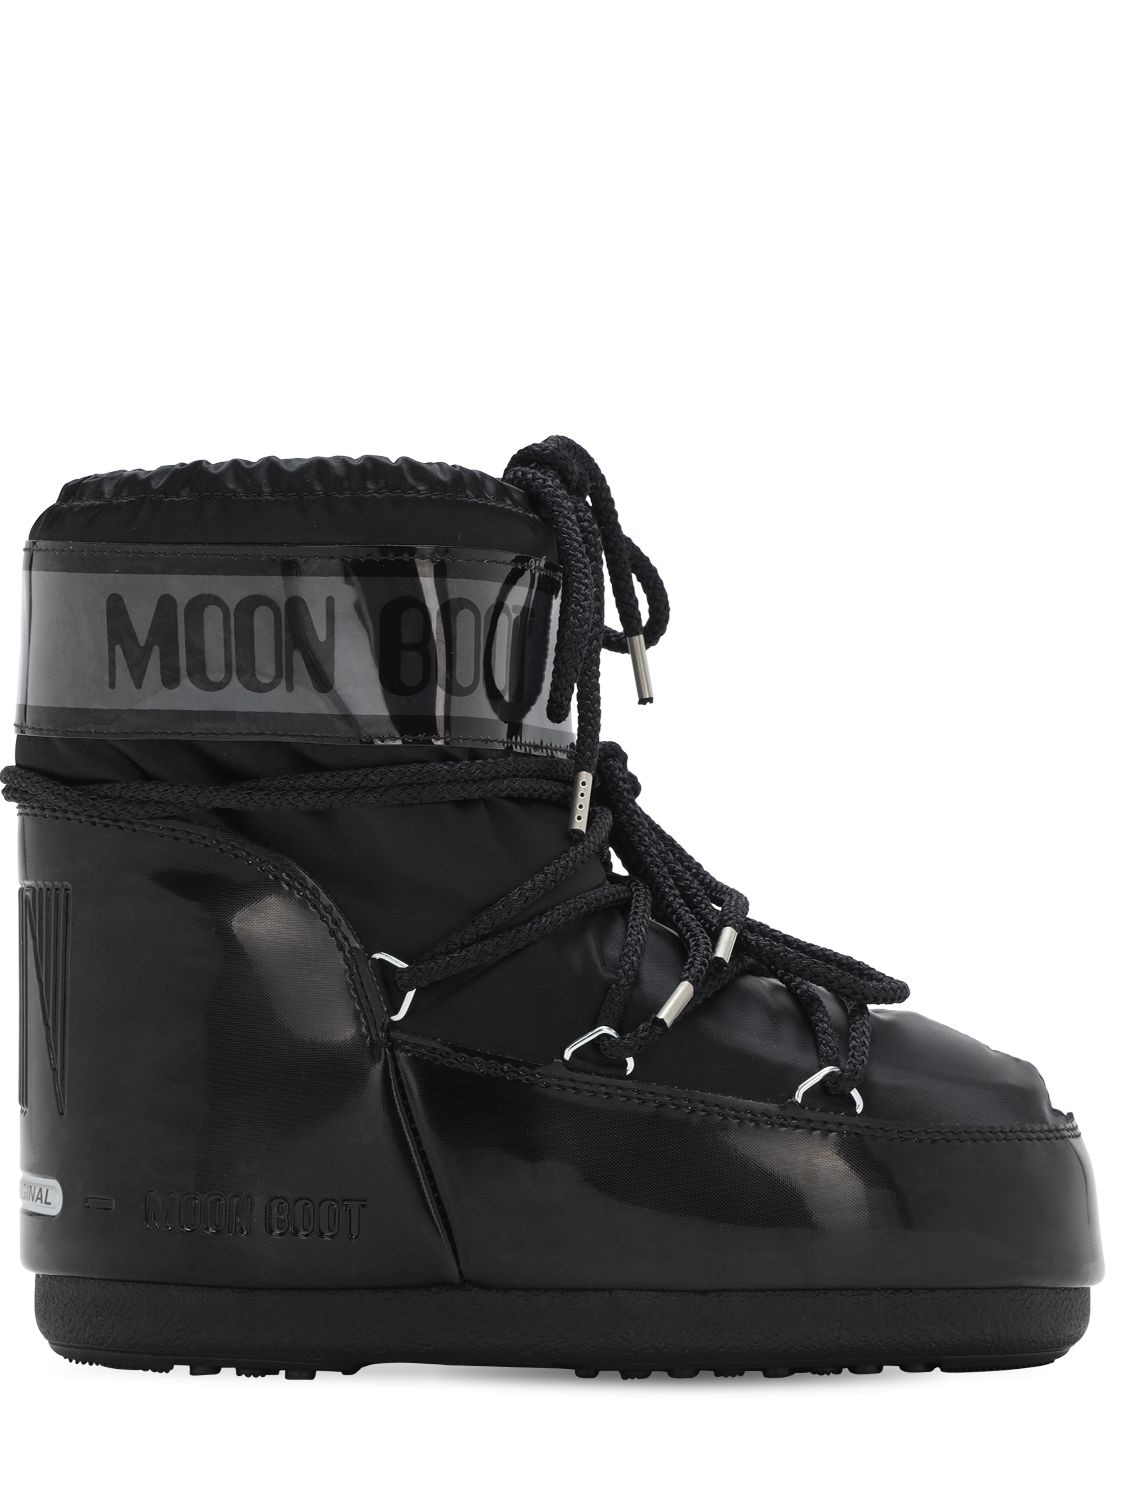 Moon Boot Glance Waterproof Low Snow Boots In Nocolor | ModeSens